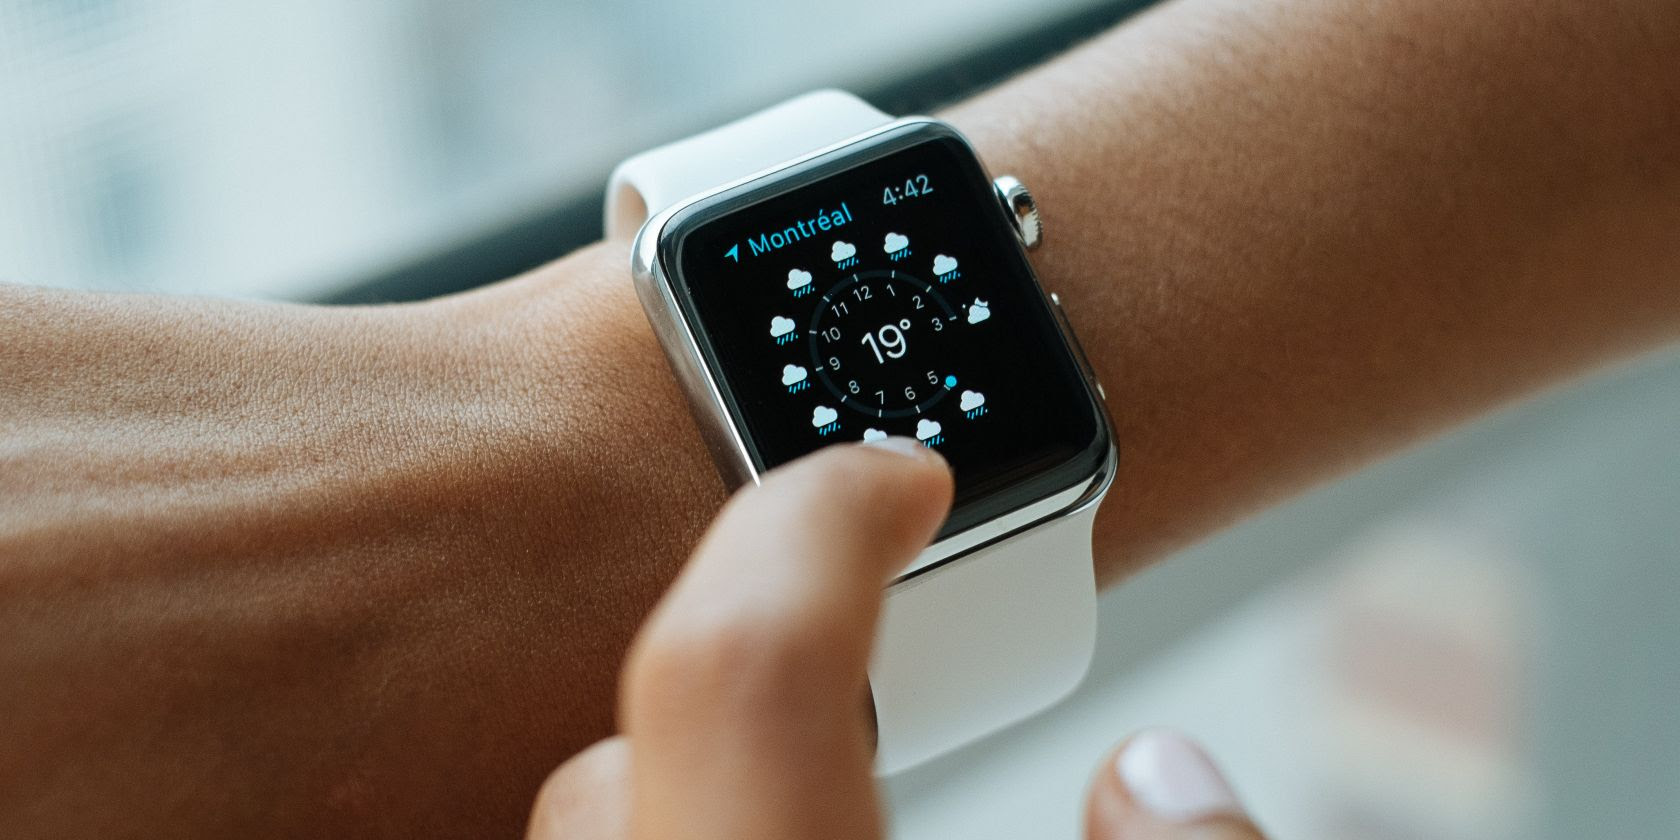 Should You Buy an Apple Watch? 5 Questions to Ask Before Doing So